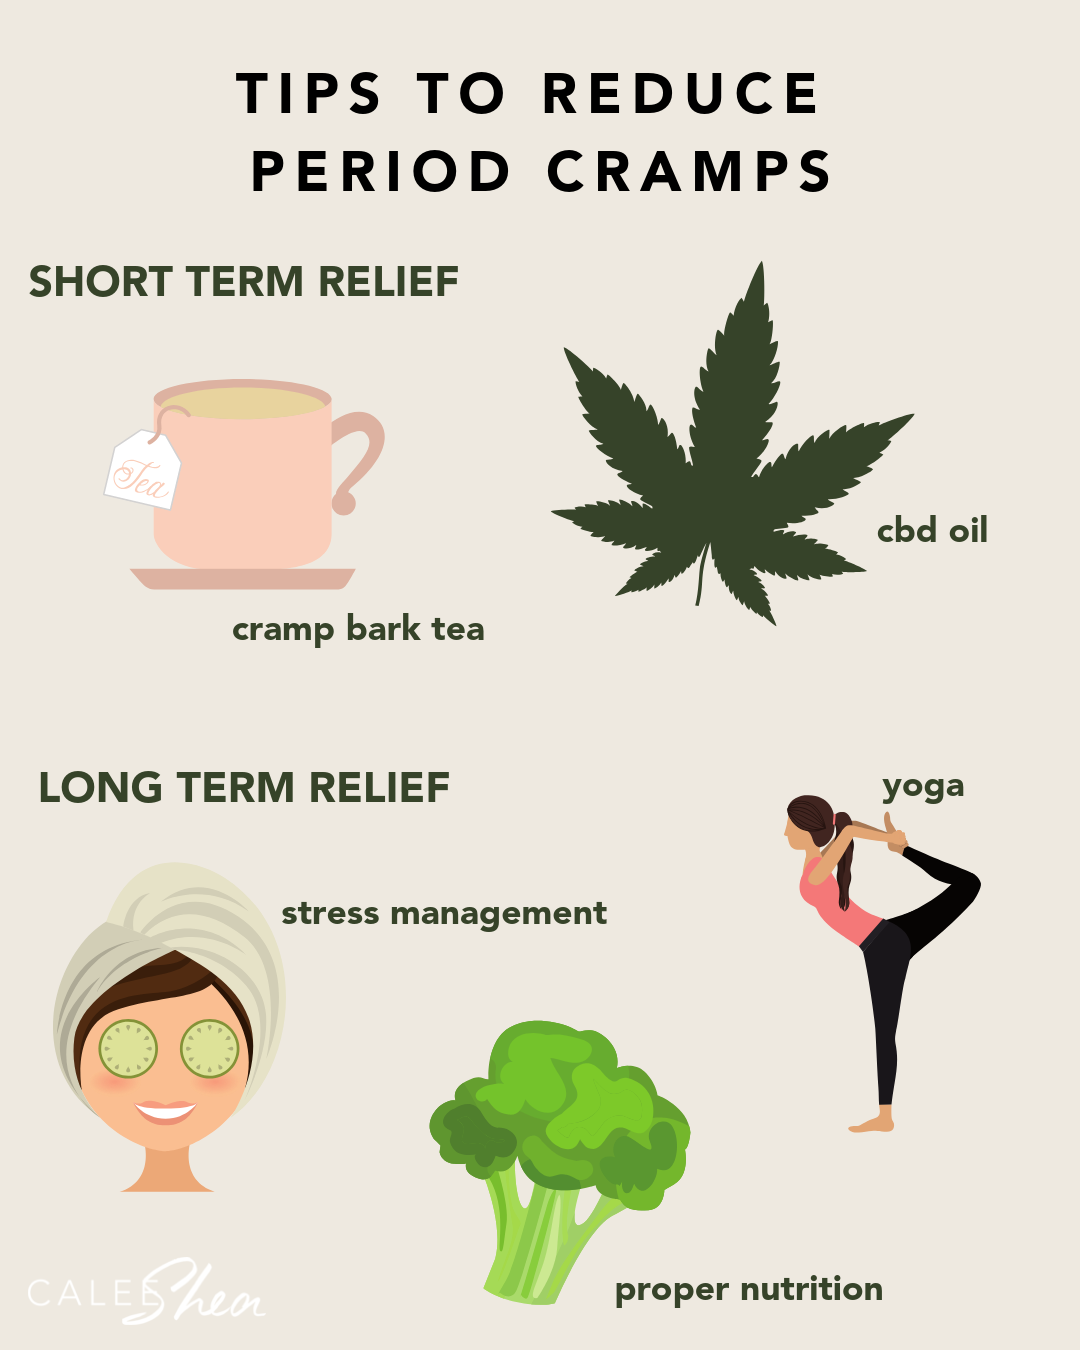 How to Find Relief from Period Cramps AKA Primary Dysmenorrhea